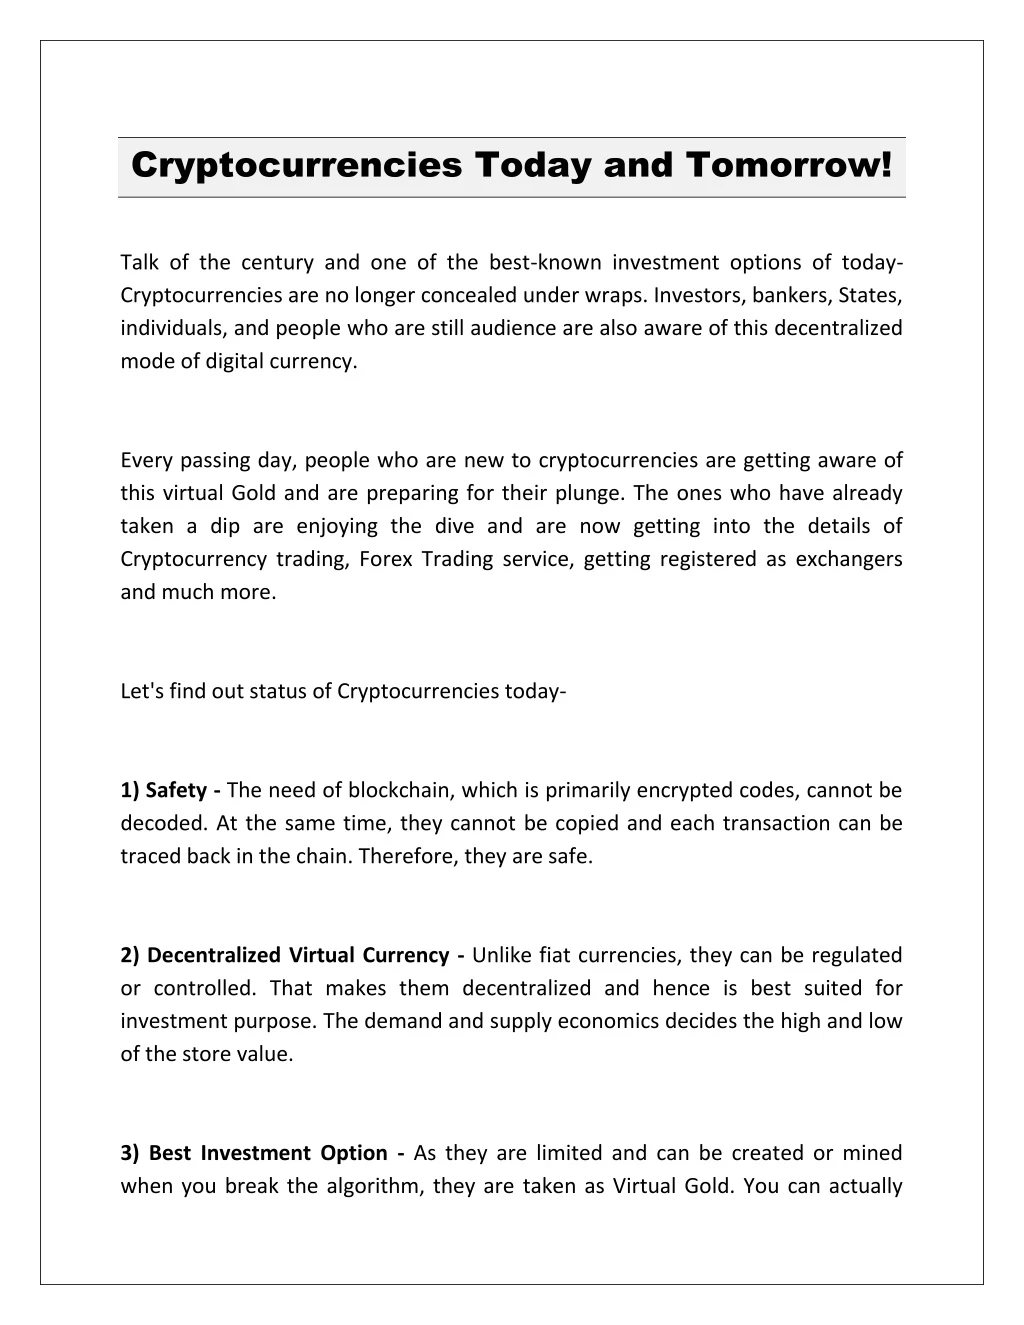 cryptocurrencies today and tomorrow